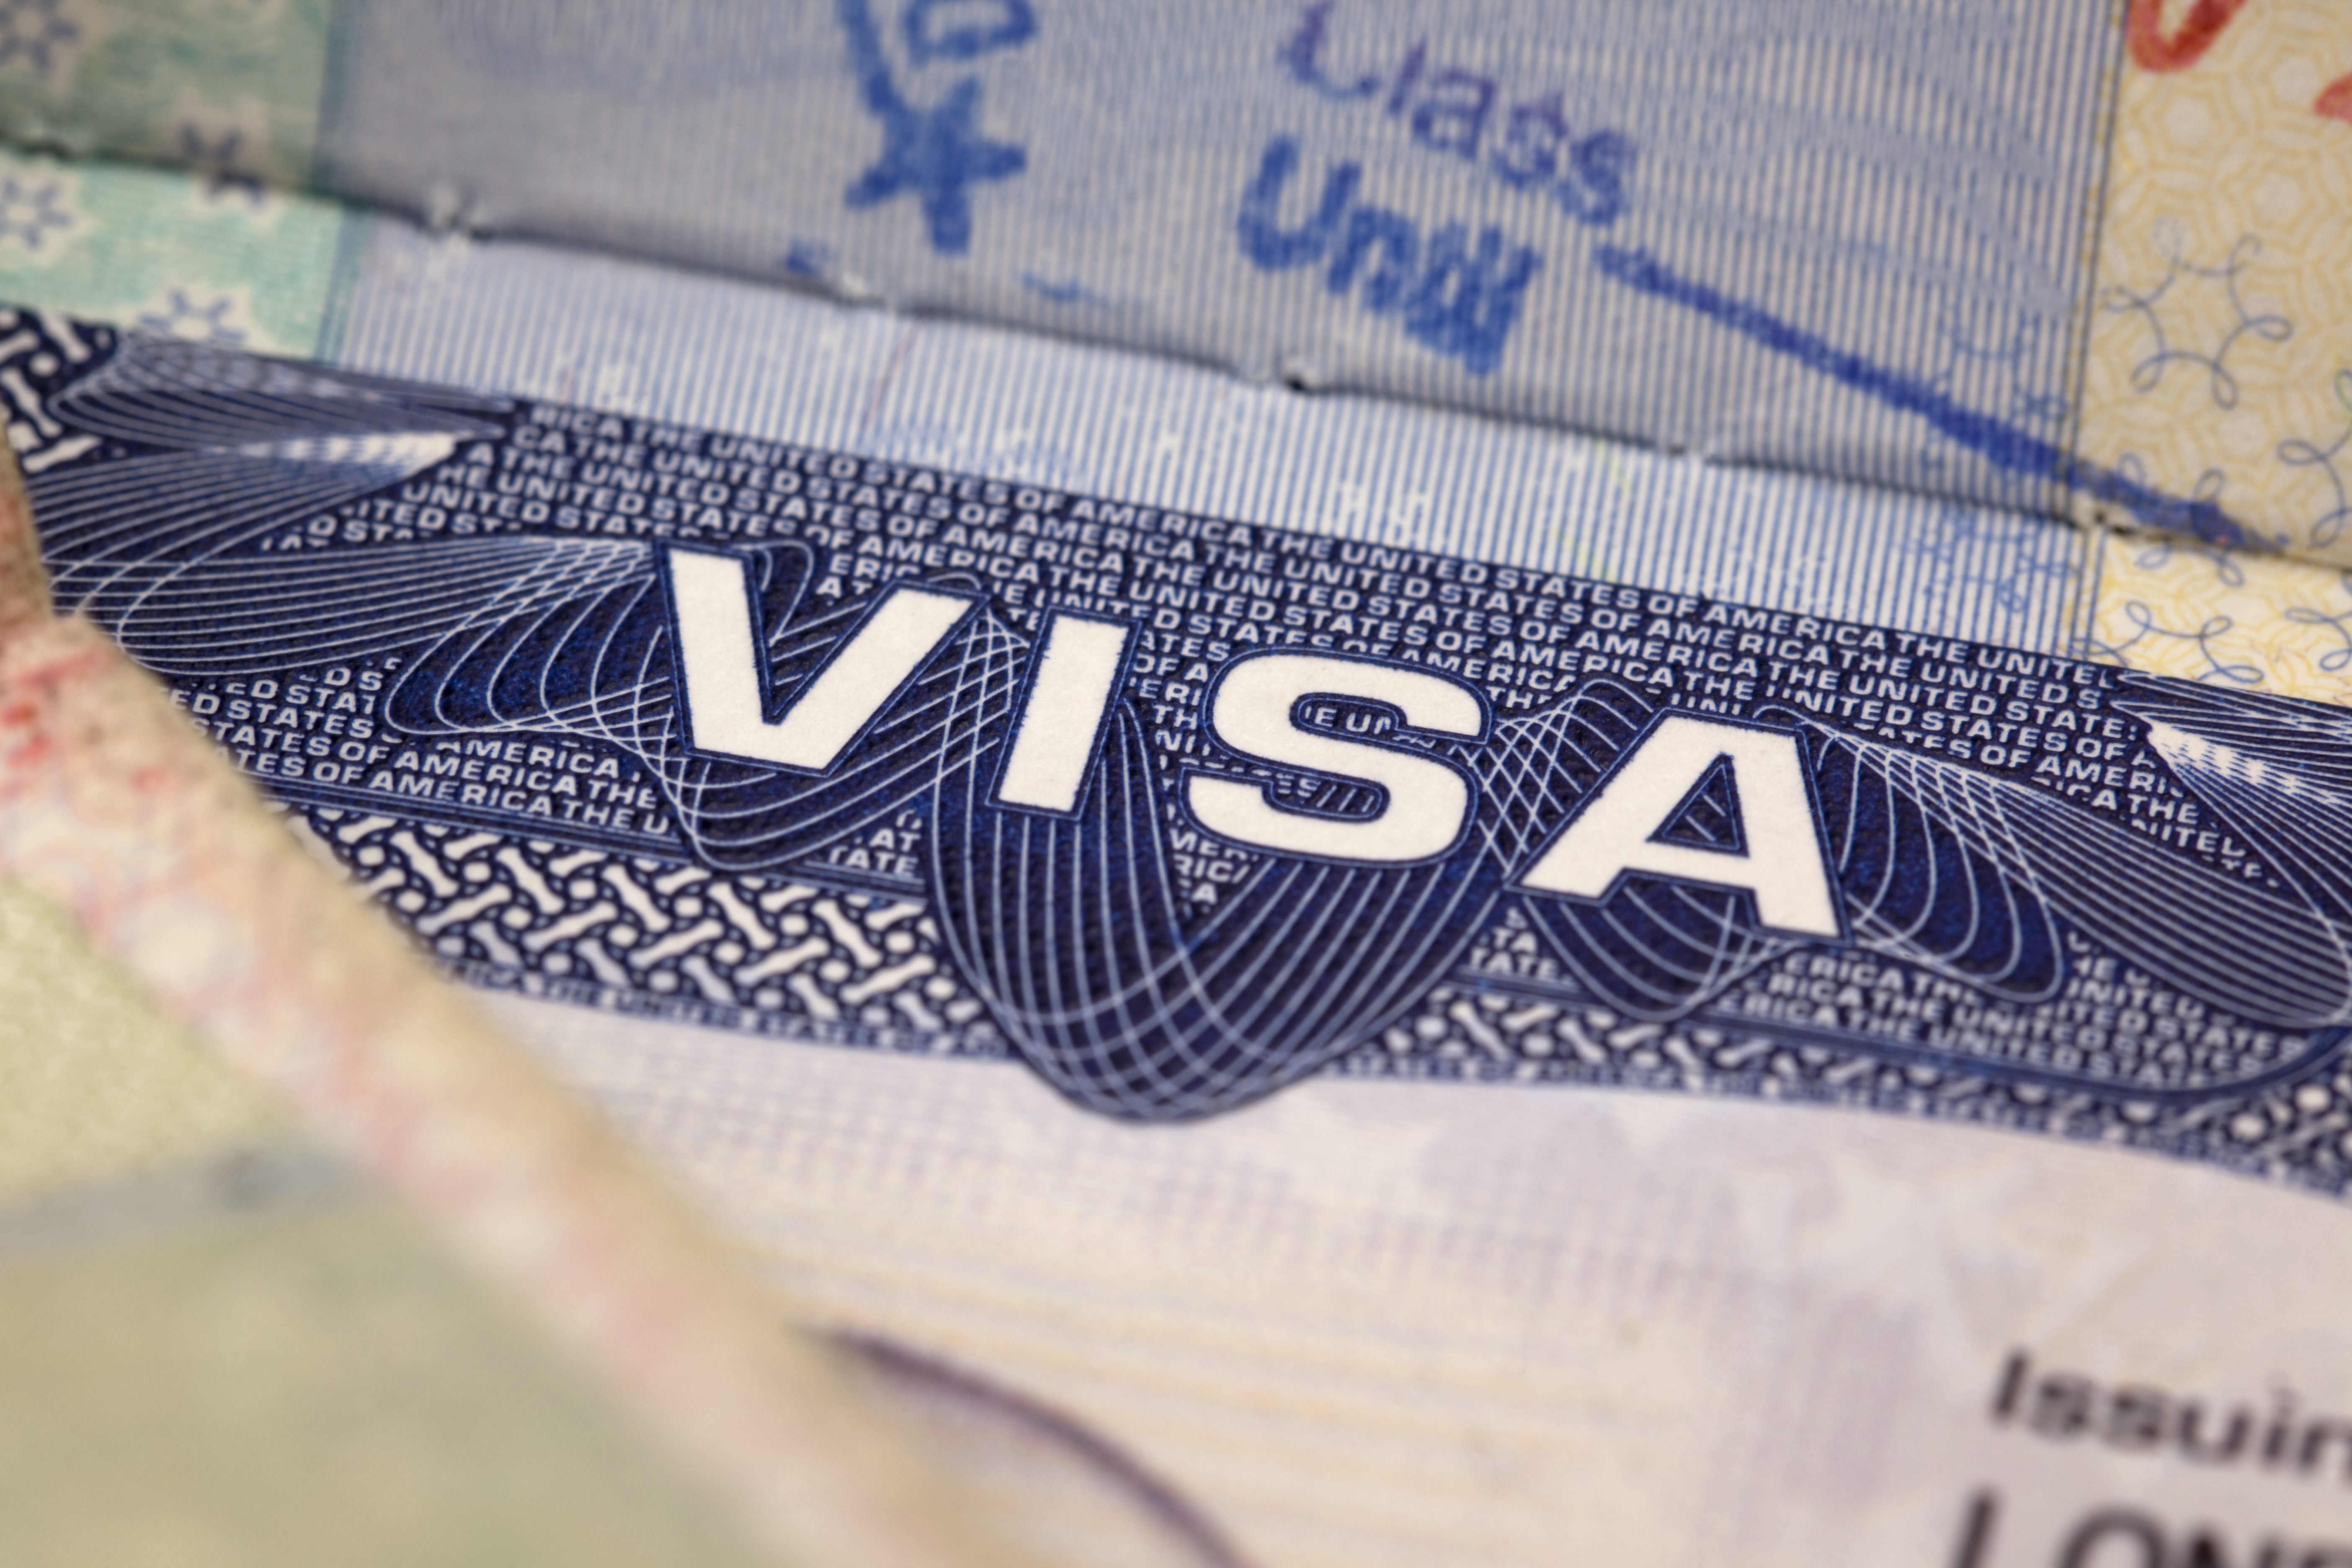 U.S. Will Temporarily Suspend Expedited Processing for H-1B Visas